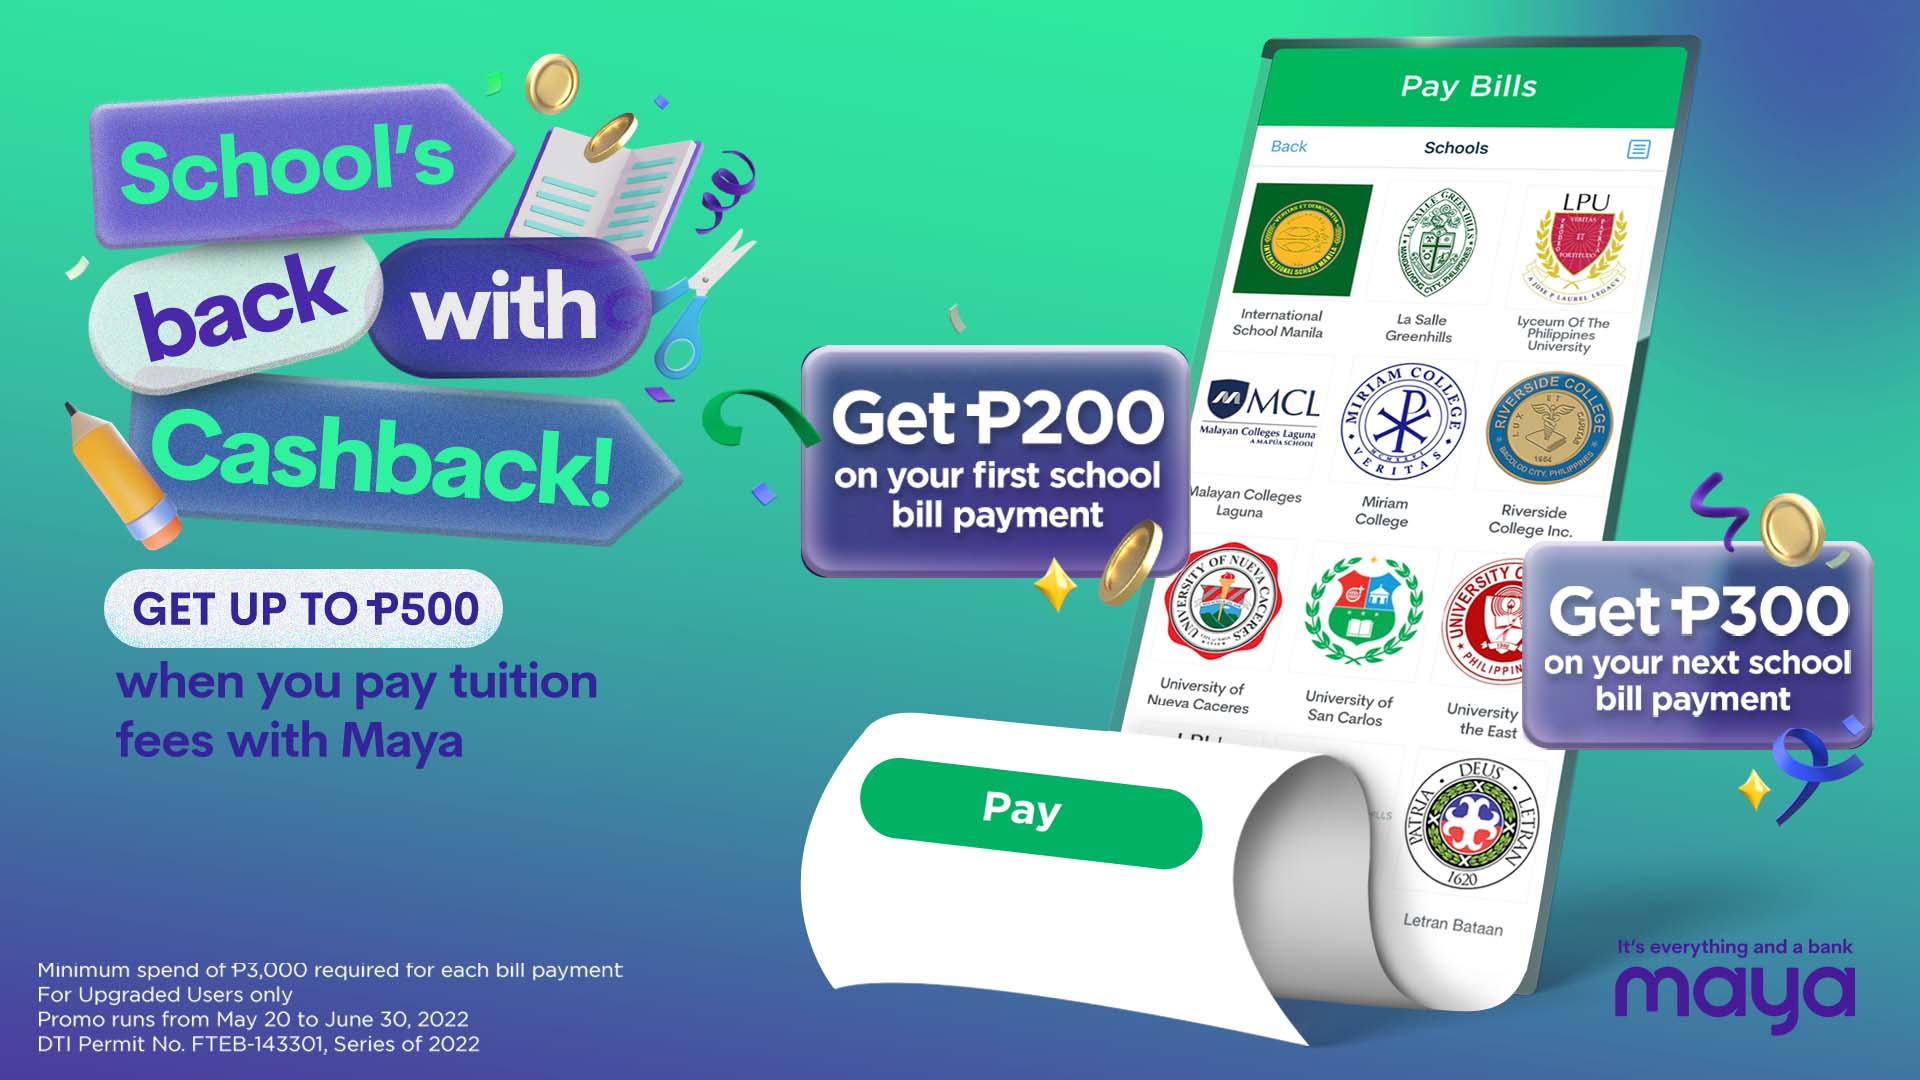 GET UP TO P500 when you pay tuition fees with Maya